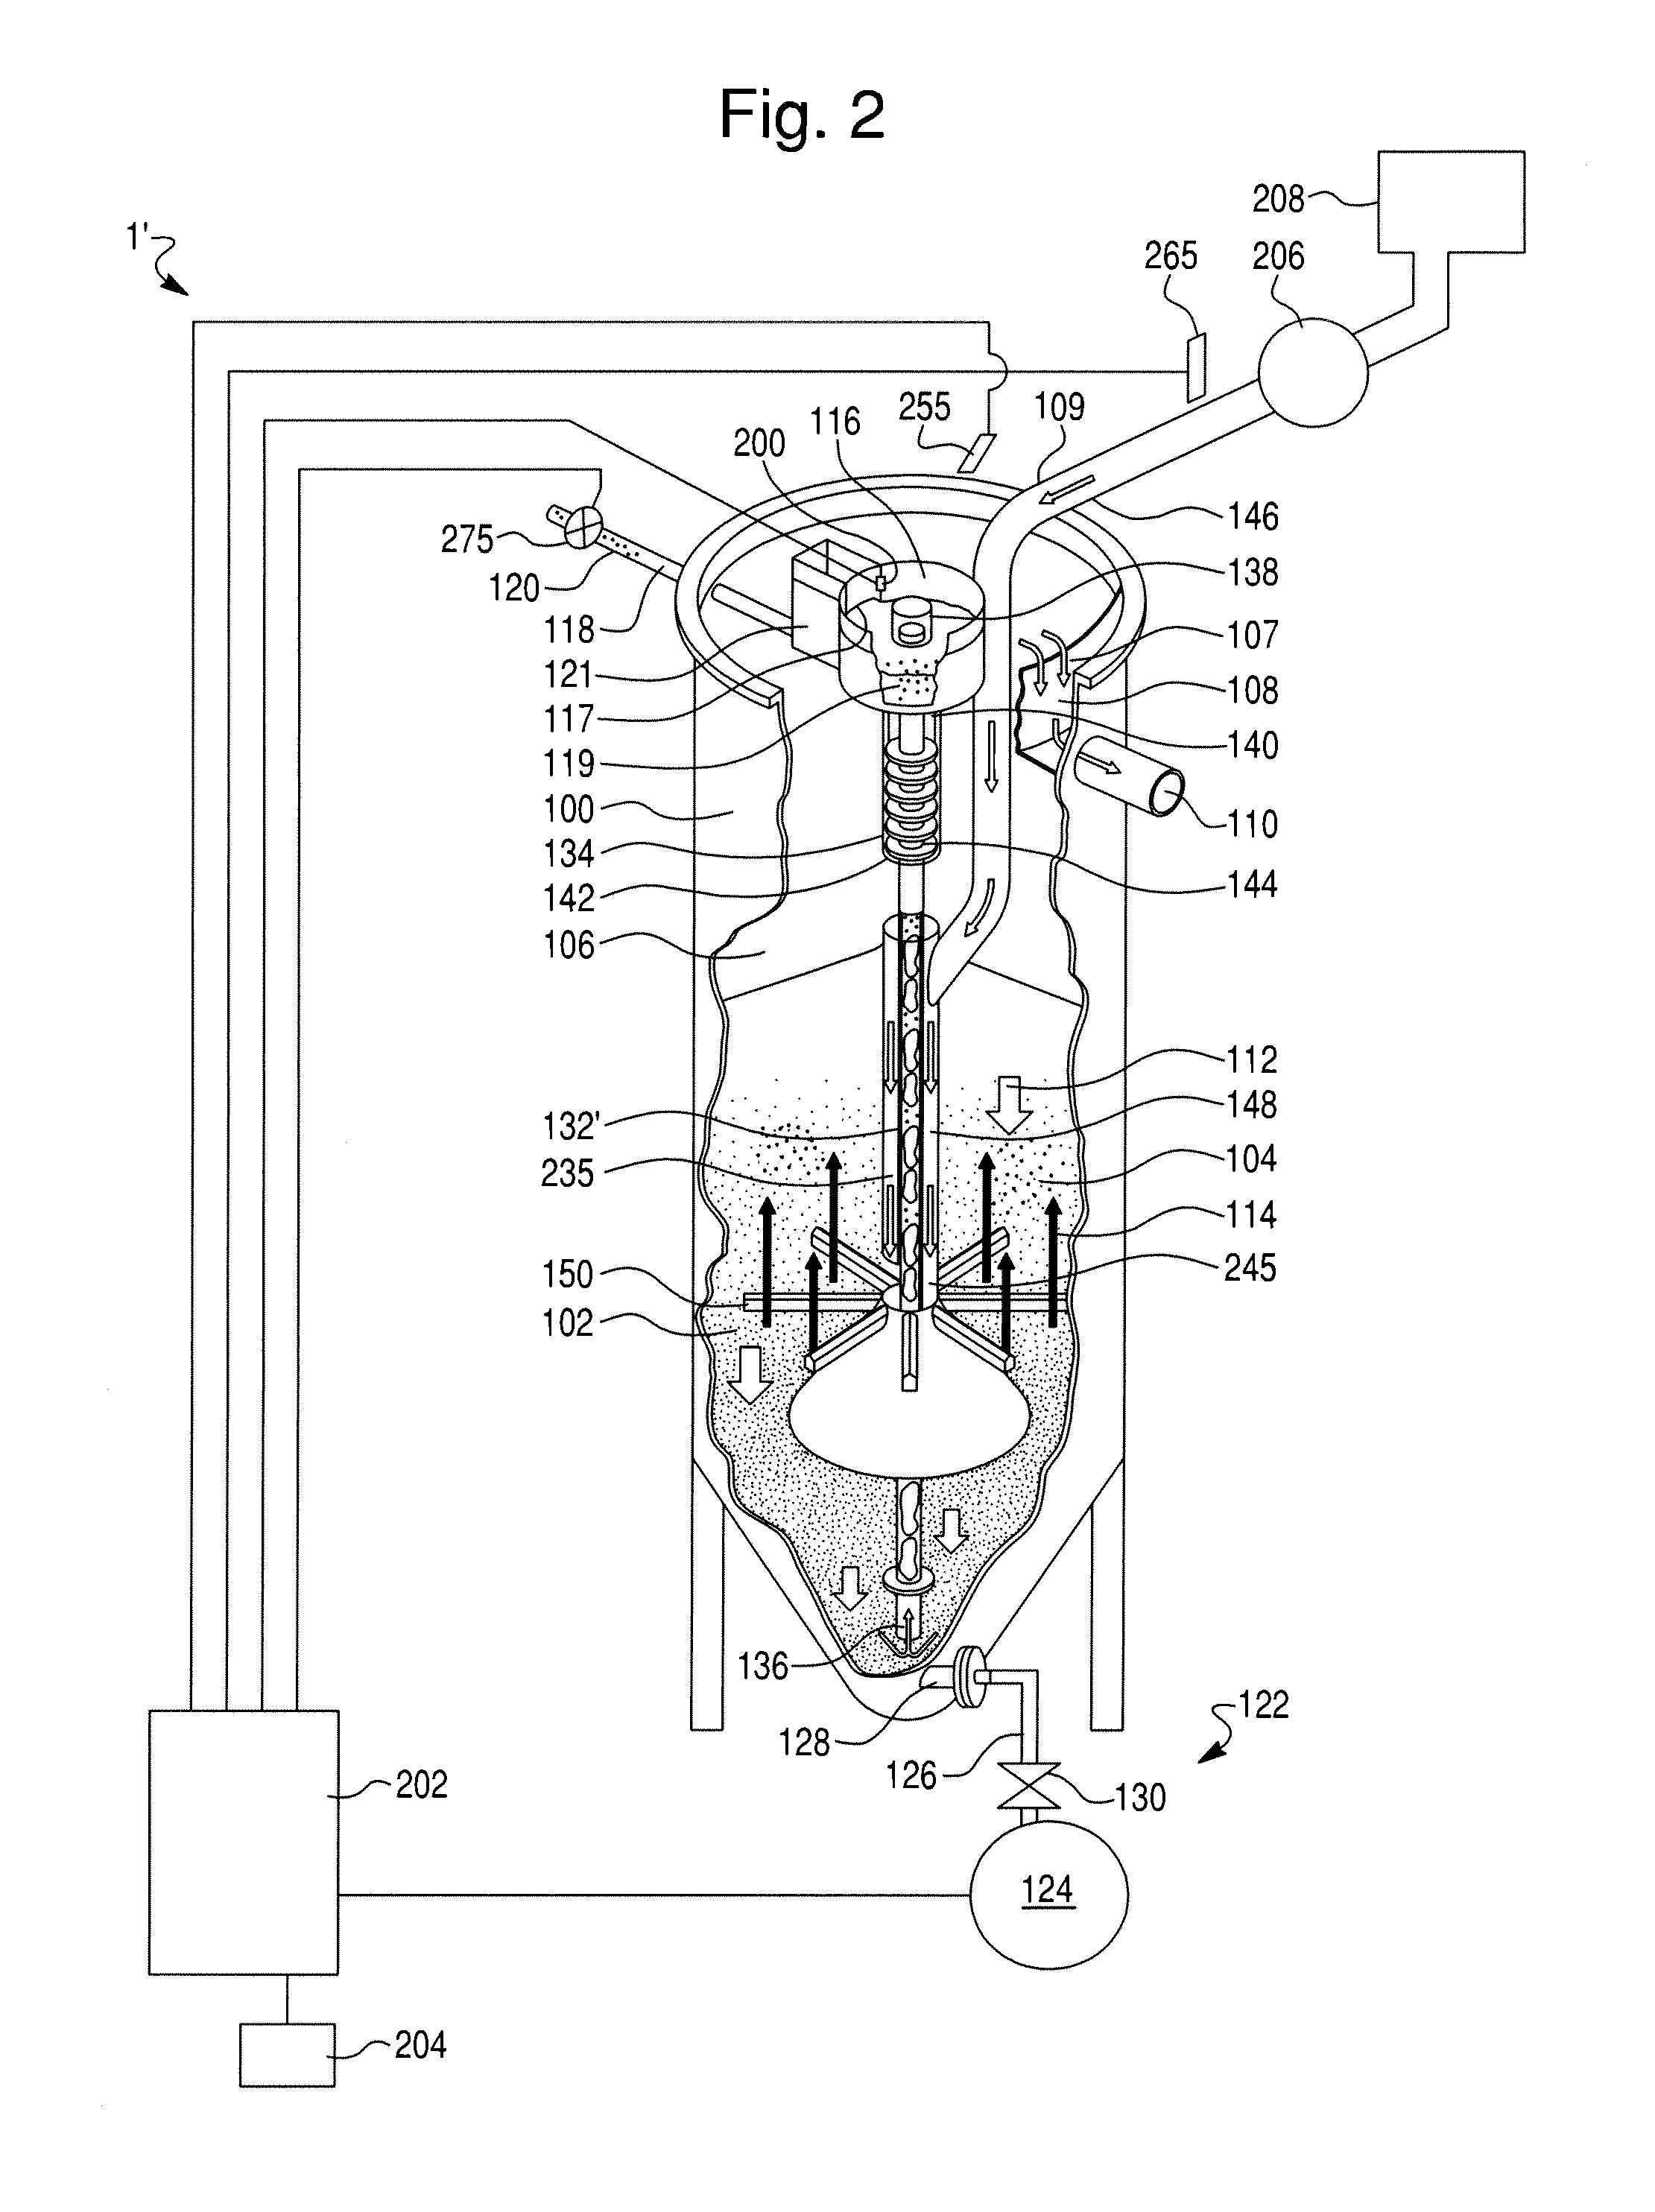 Method and computer program product for treating liquid containing impurities